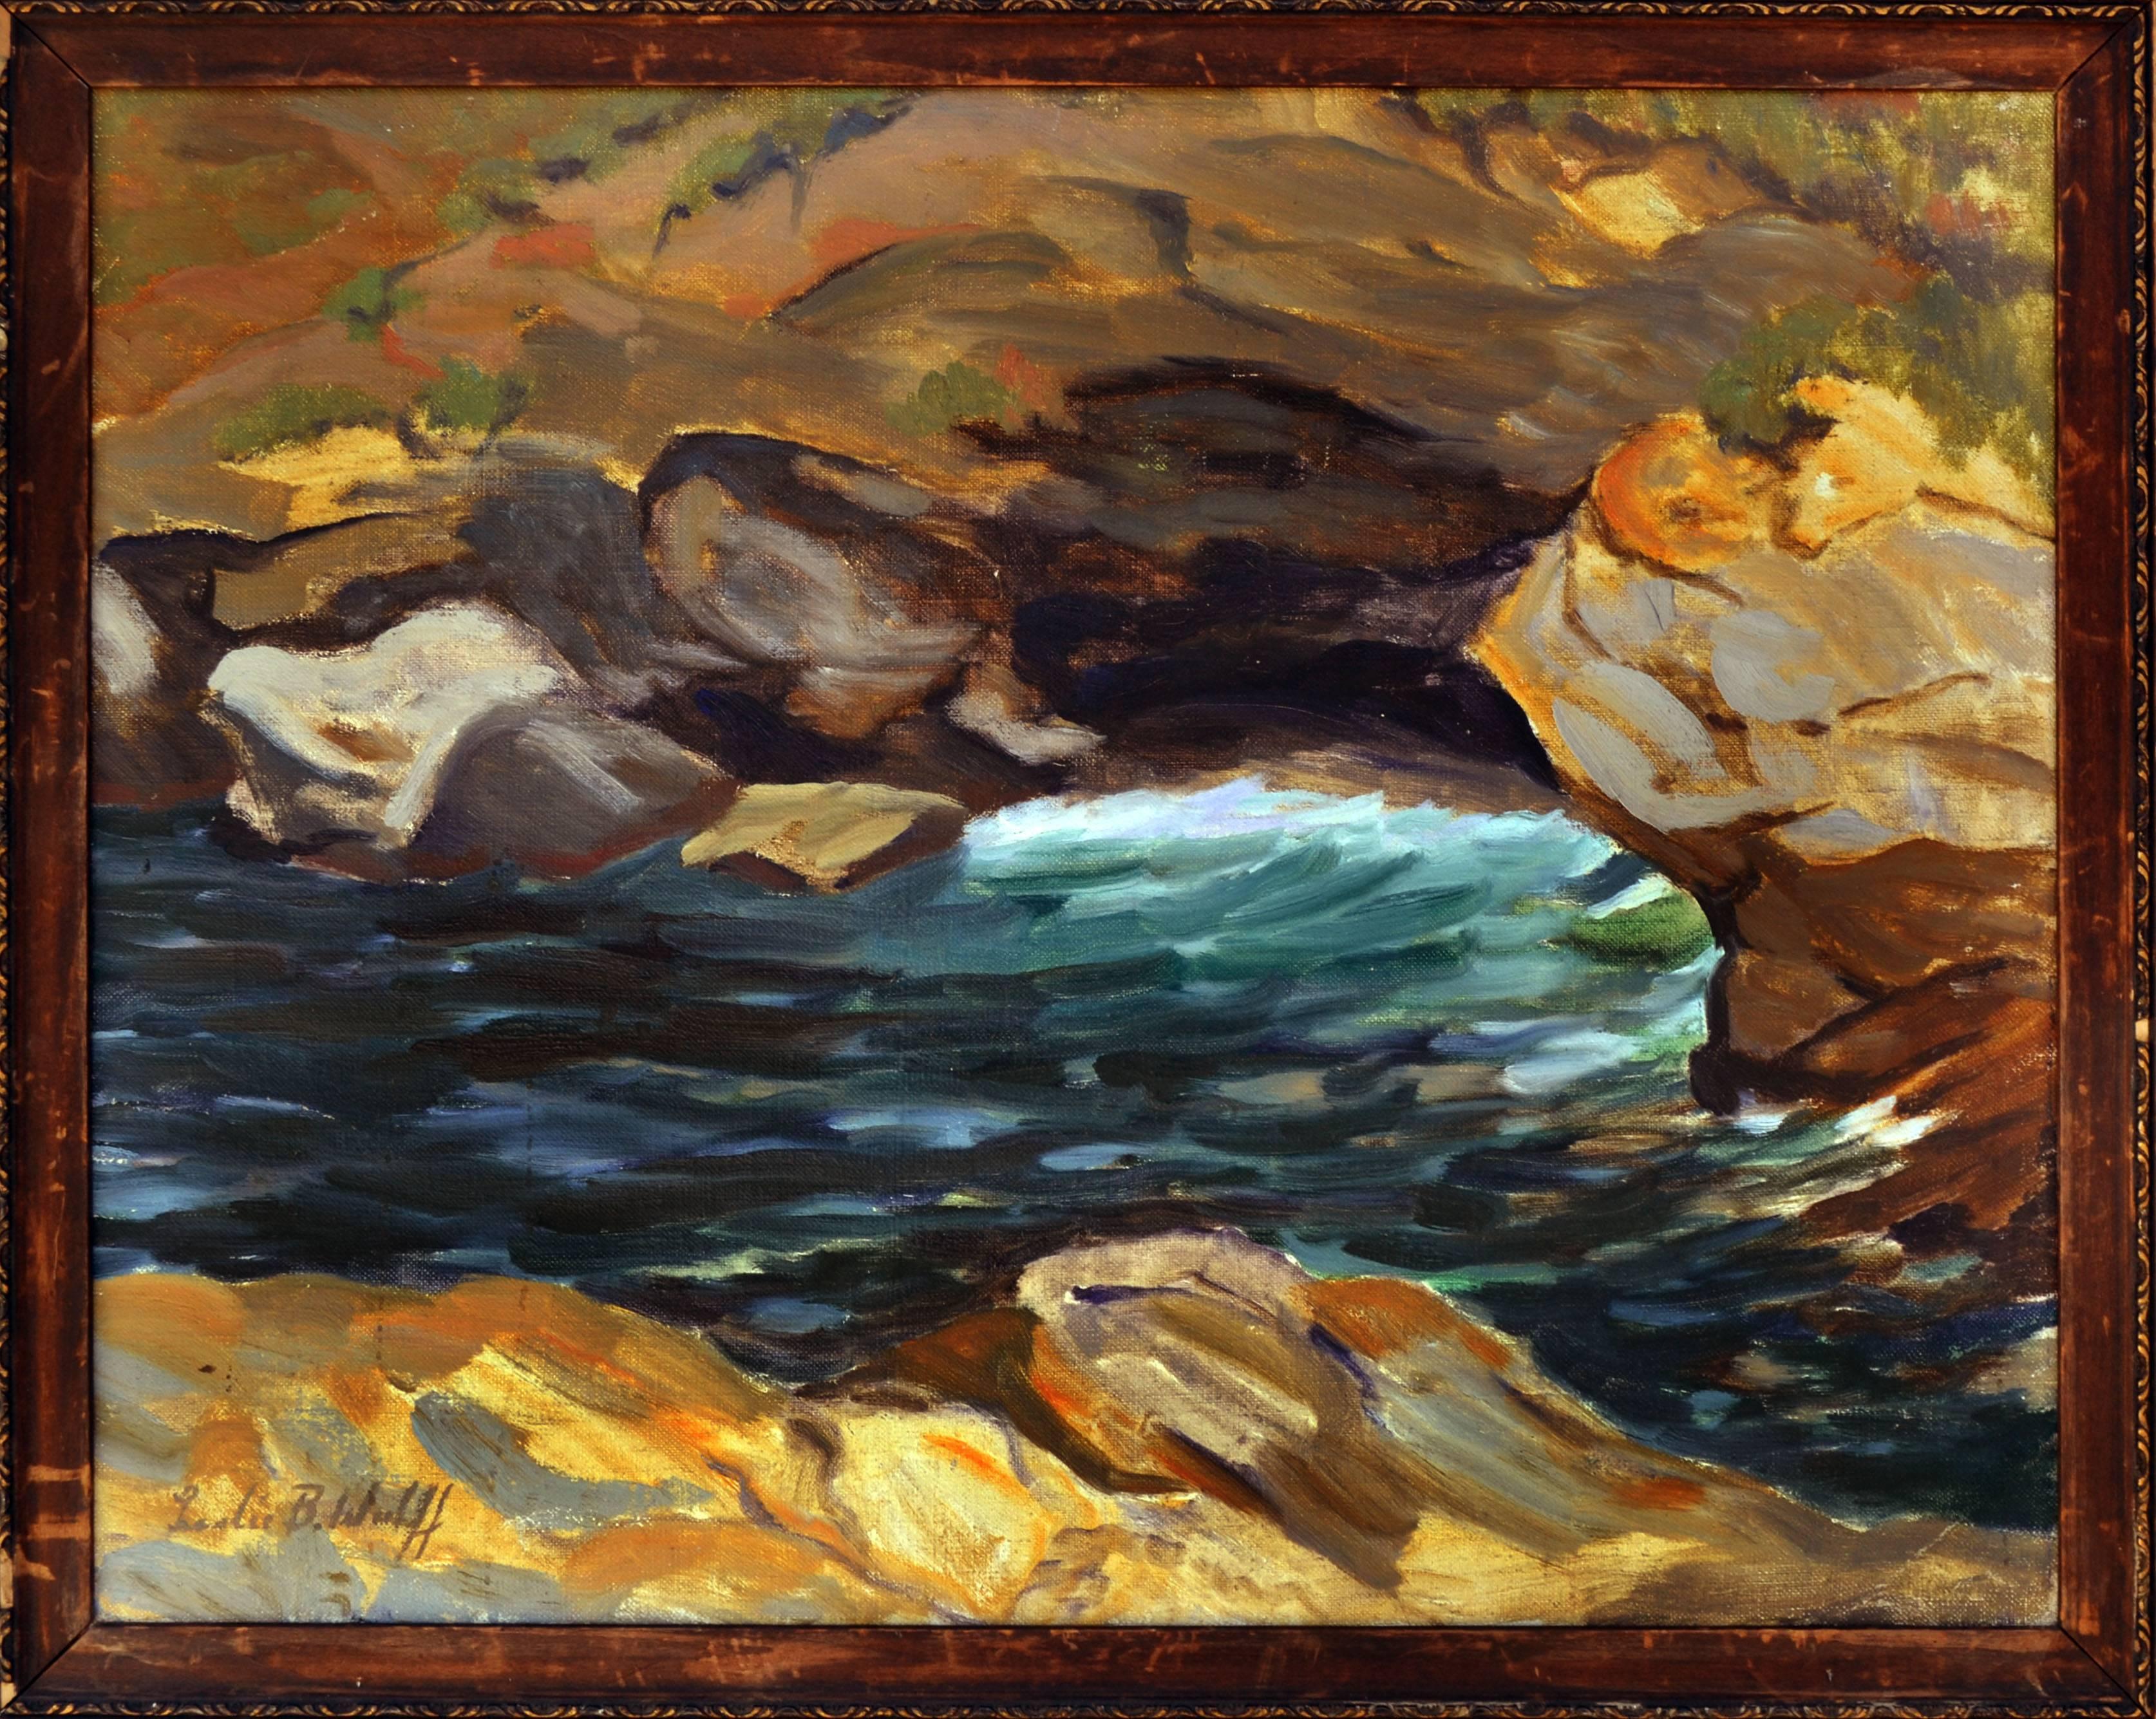 Leslie Bruner Wulff Landscape Painting - Water on the Rocks - 1930's Abstracted Landscape